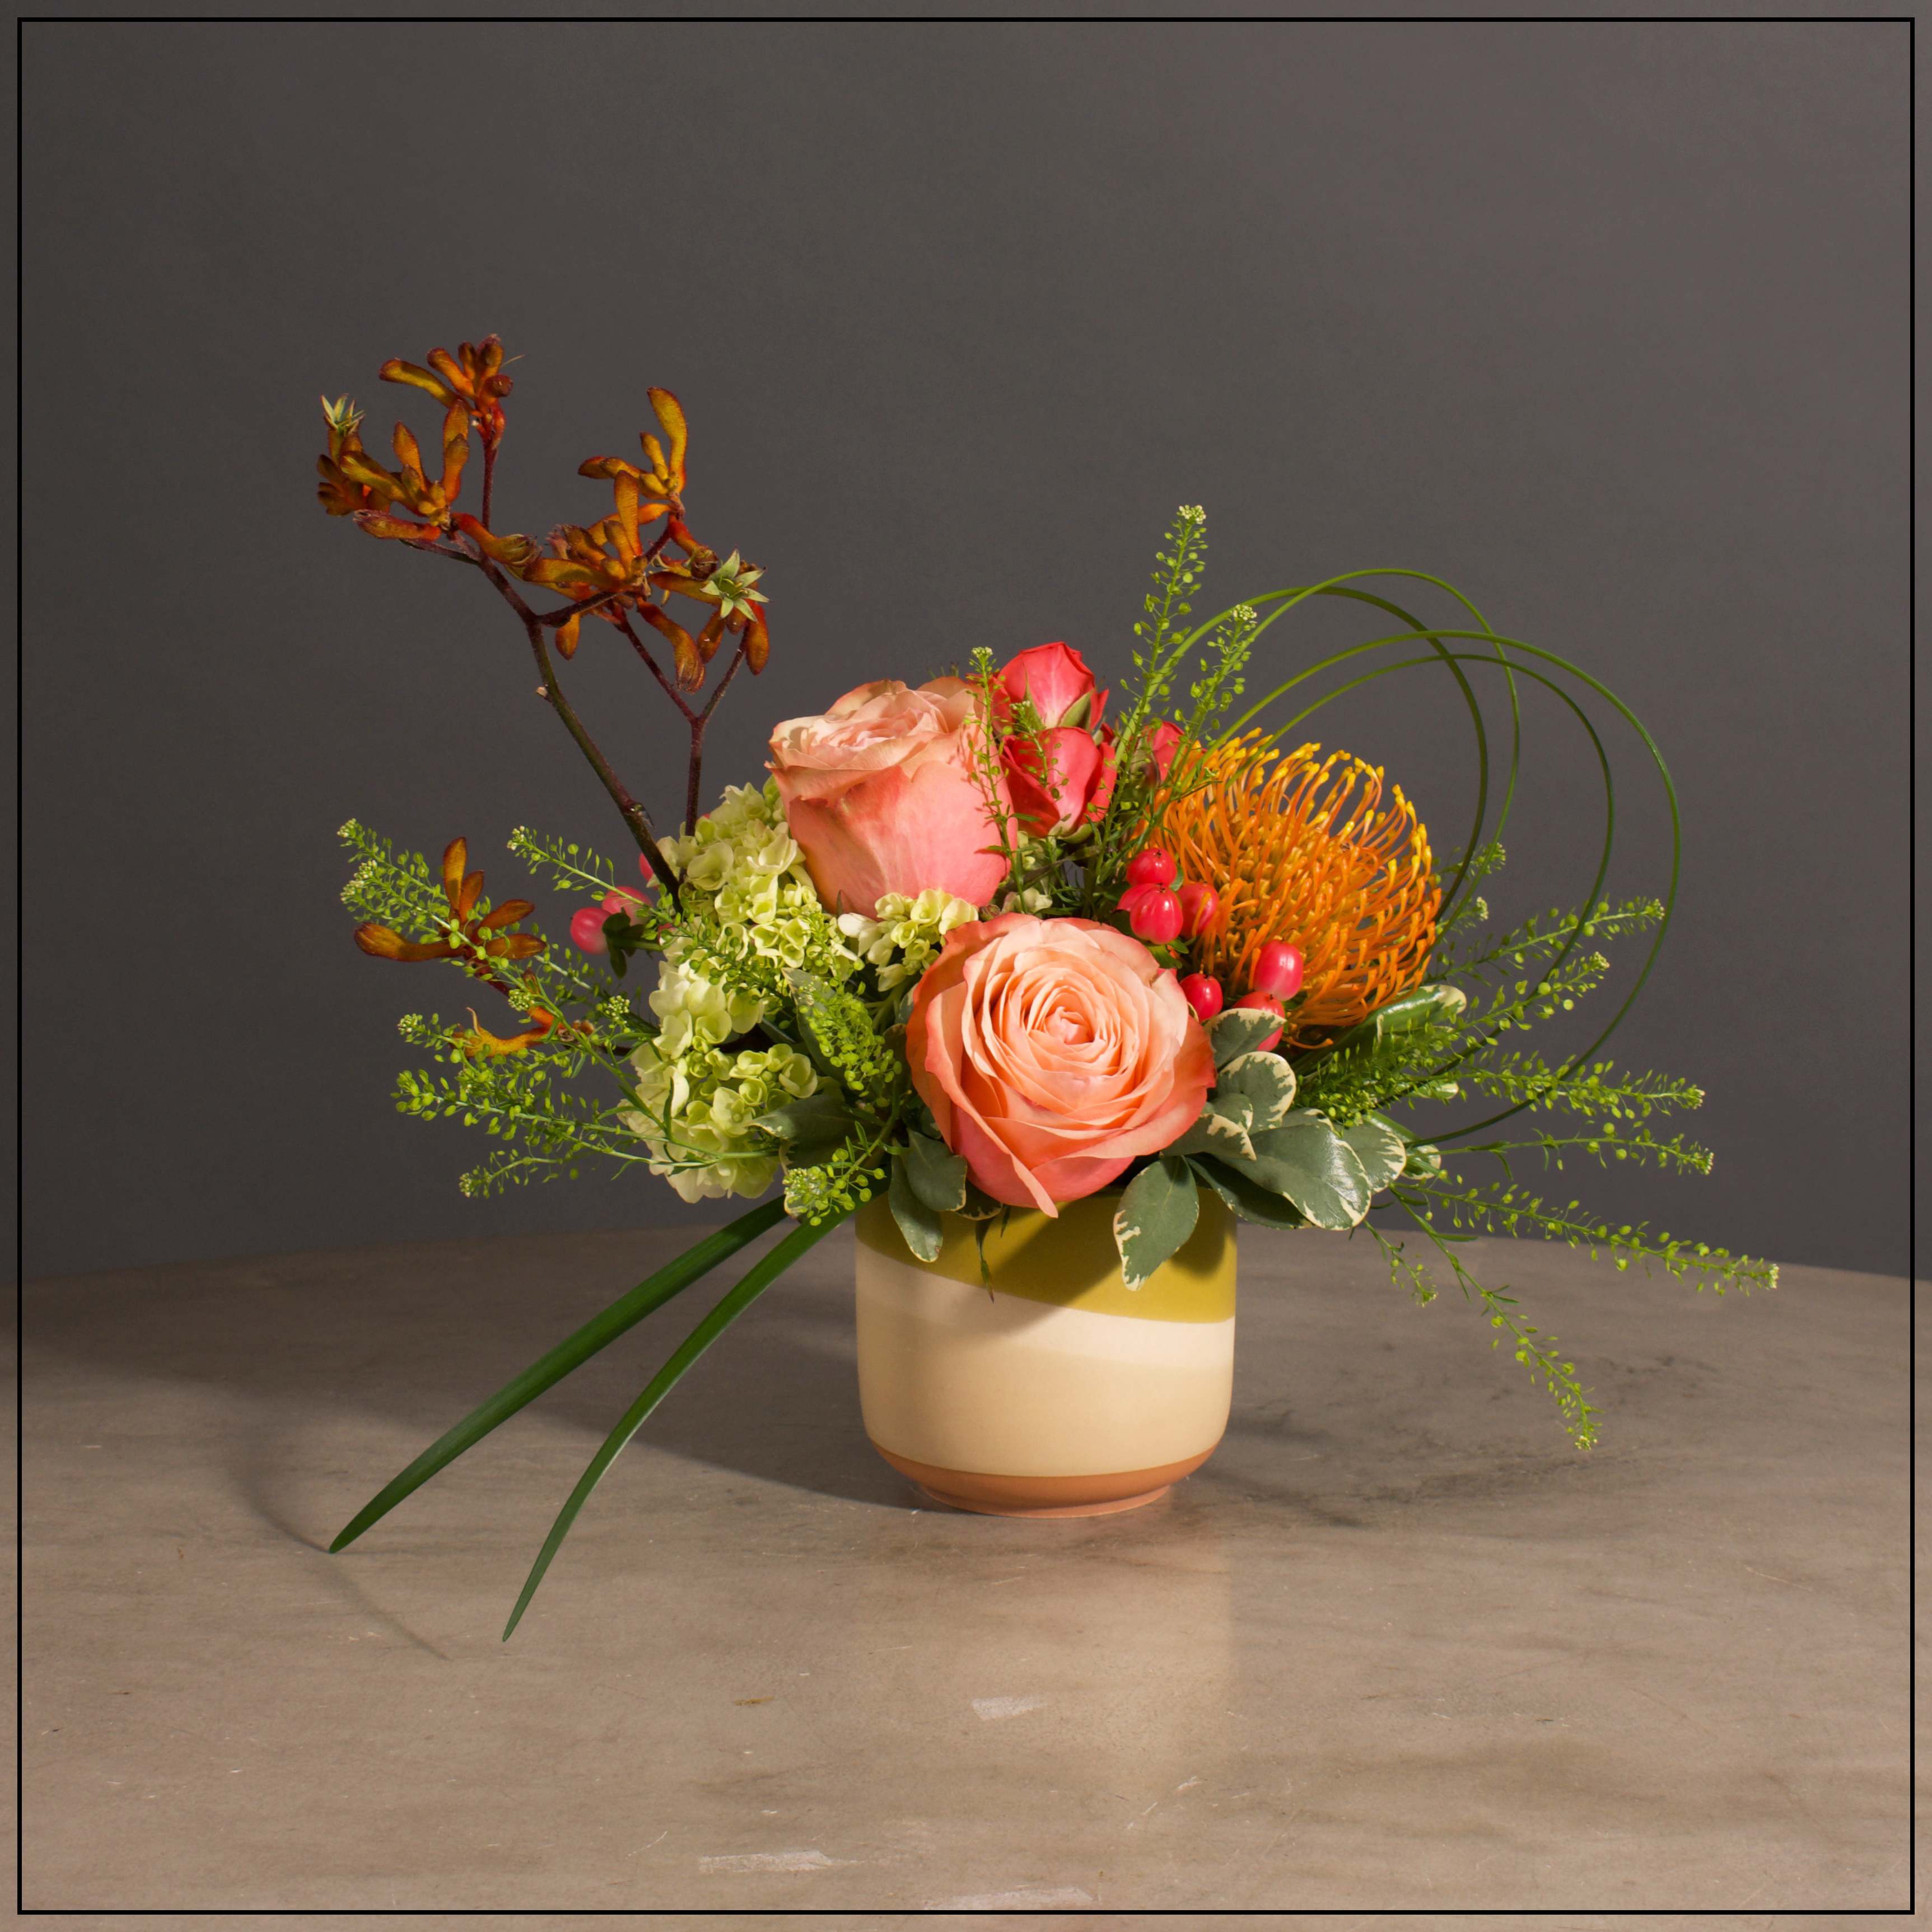 Sunset - Roses, Spray Roses, Protea and Kangaroo Paw with Filler and Greens in a Cute Ceramic Pot.  Approximately 11&quot; H x 11&quot; W